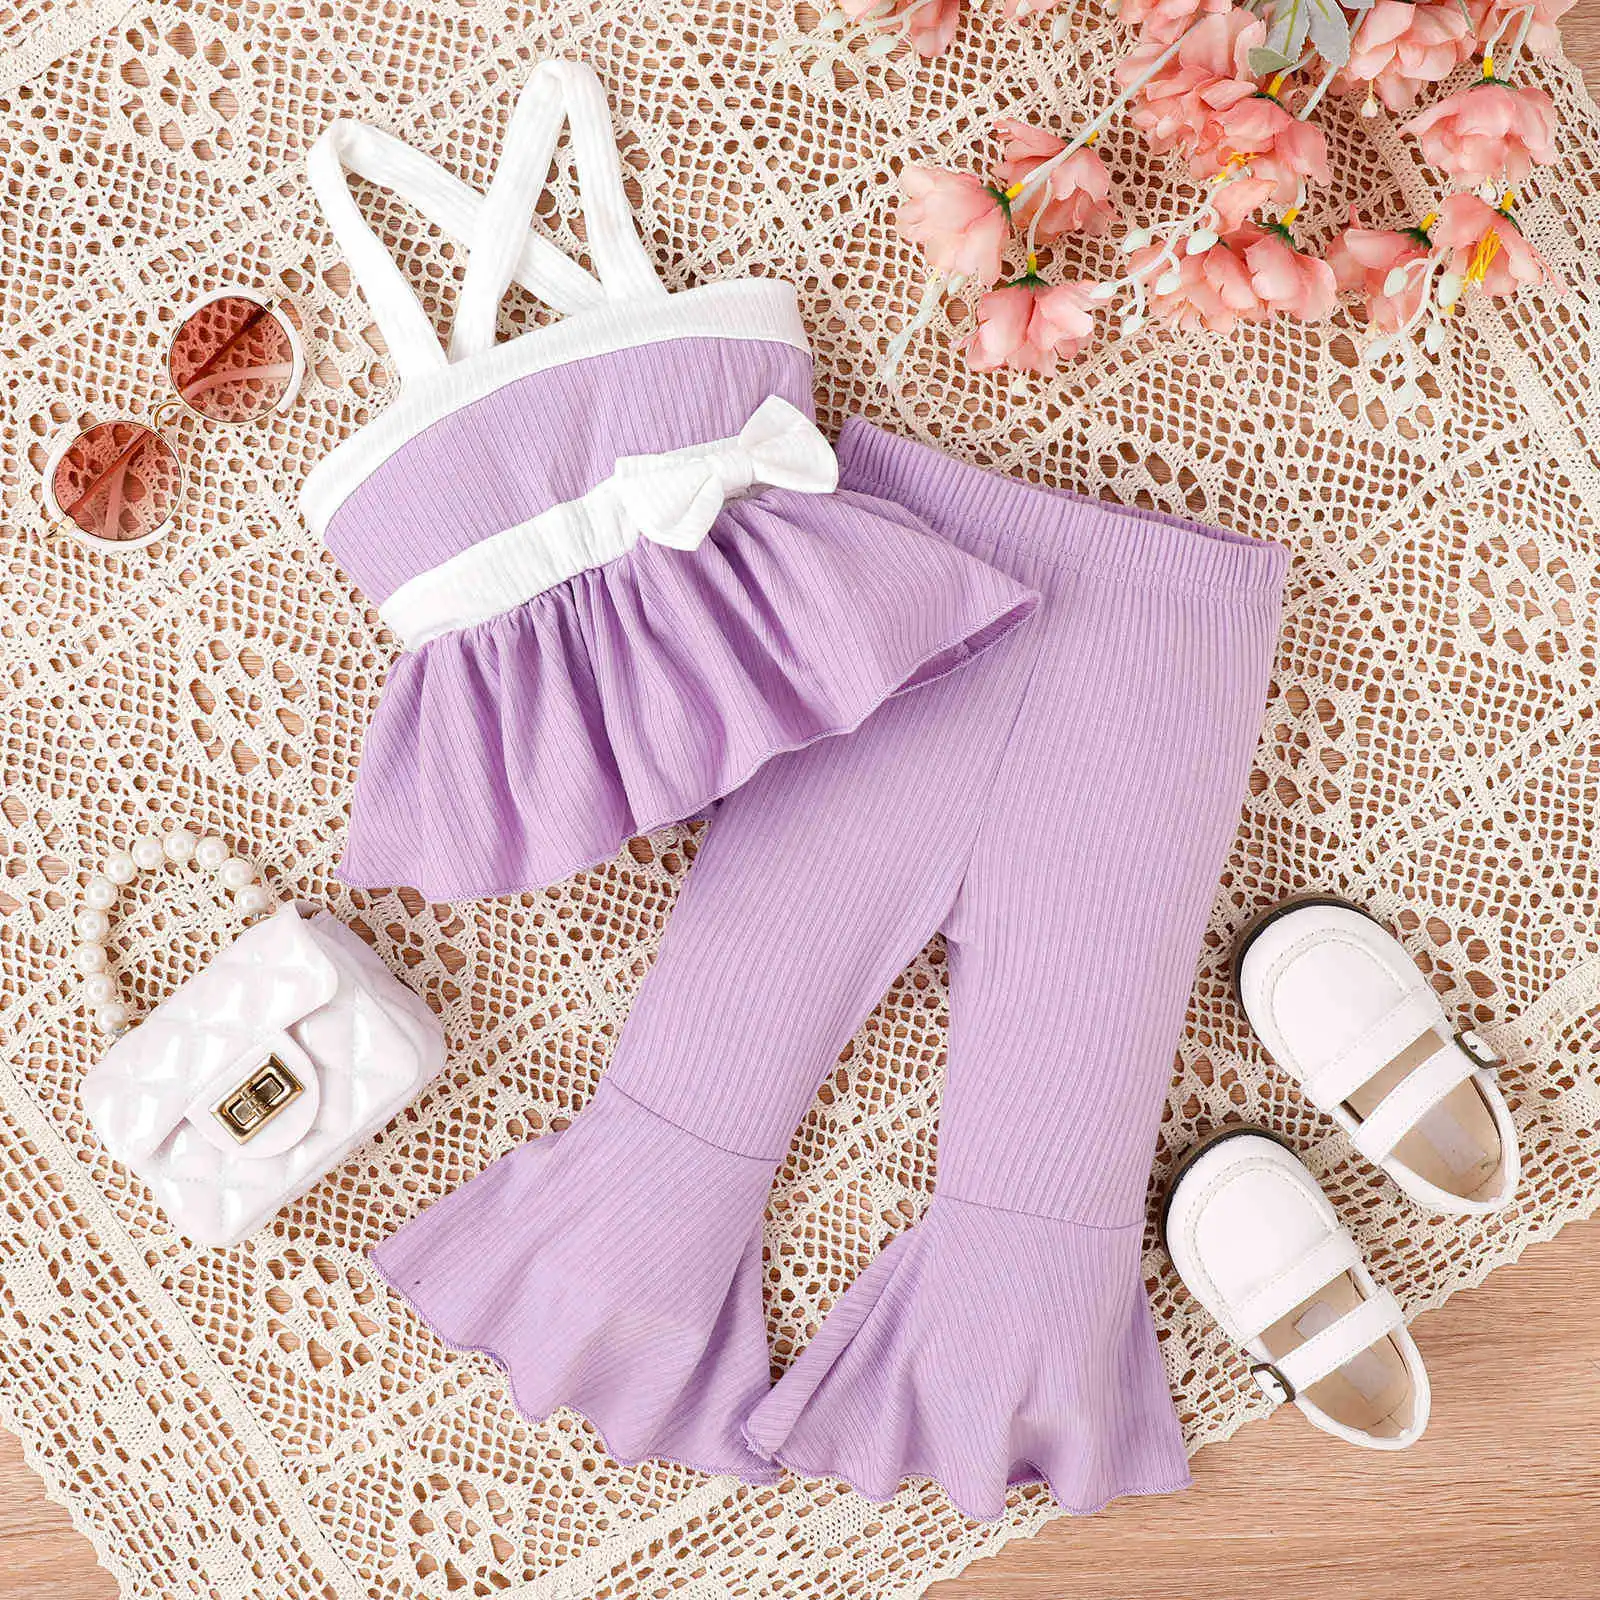 

Summer Infant Toddler Baby Kid Girls Clothes Set Pure Cotton Color Matching Bow Strap Top+Flared Pants 2PCS Children Suit 6M-5T